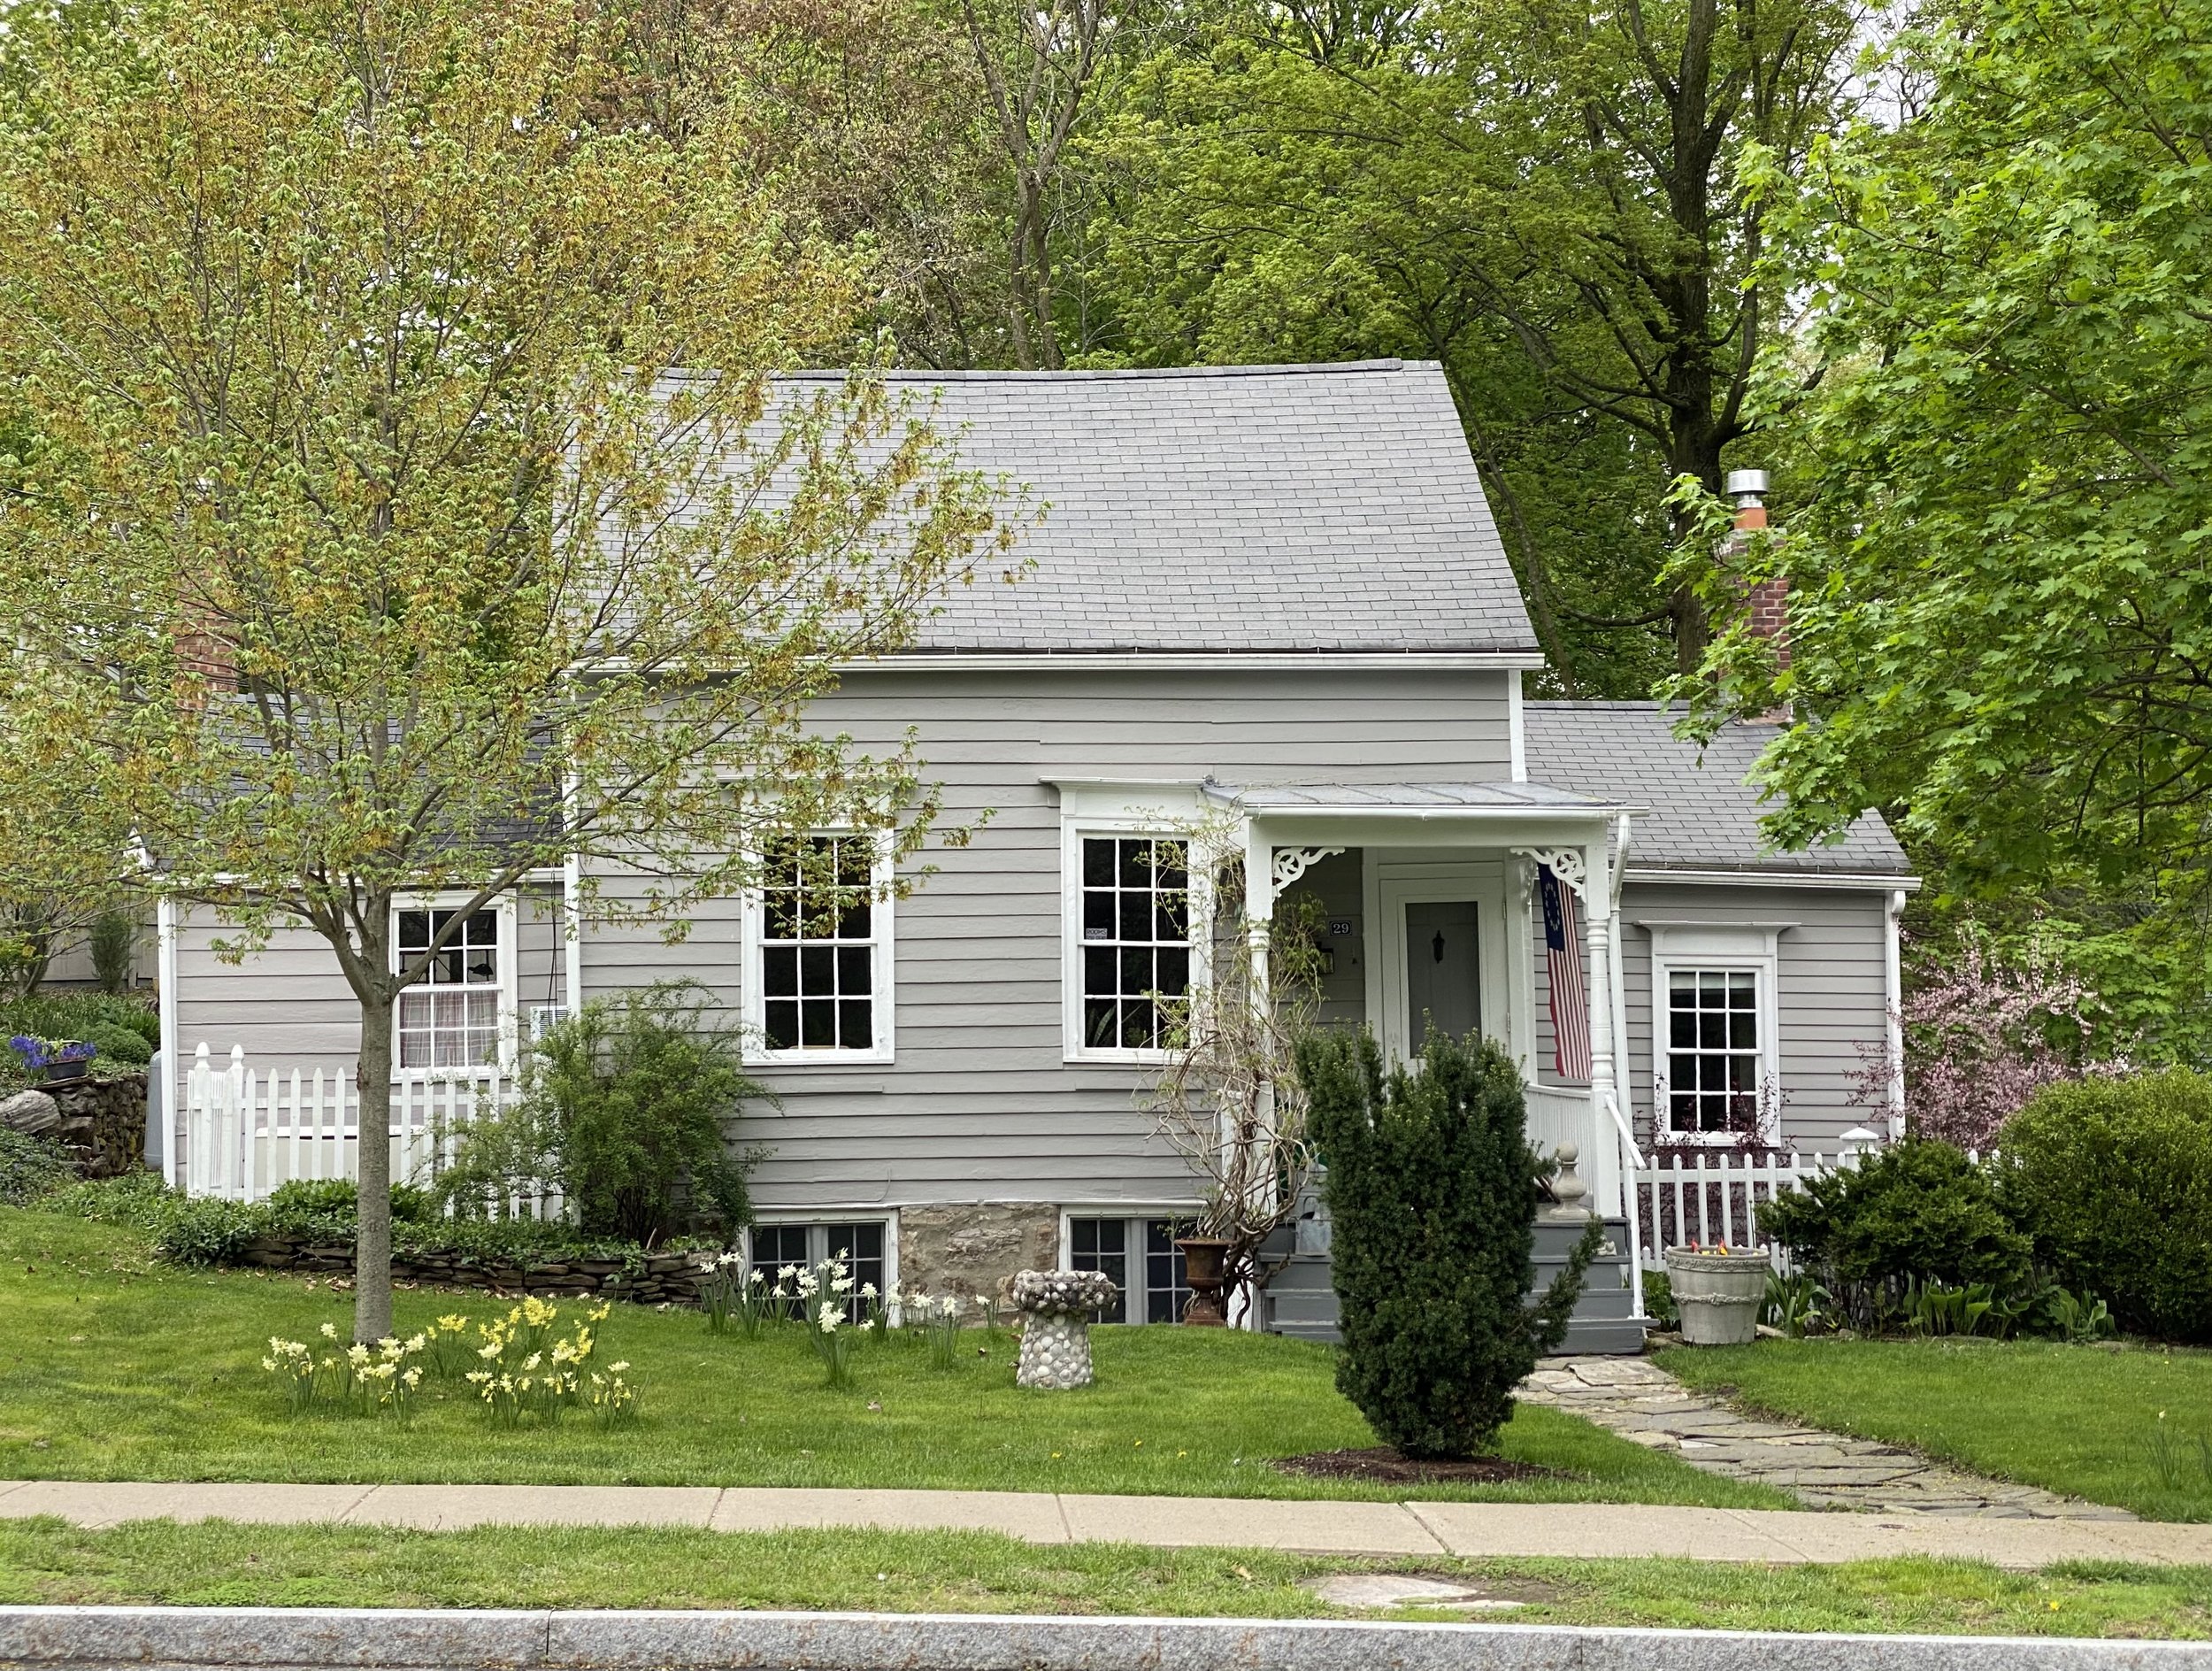  When I first bought my house in 2018 it was grey; but I already knew it was destined to be painted pink, especially after I learned that one of the previous owners (known by the neighborhood children as “the Skunk Lady”) had it painted pink, probabl